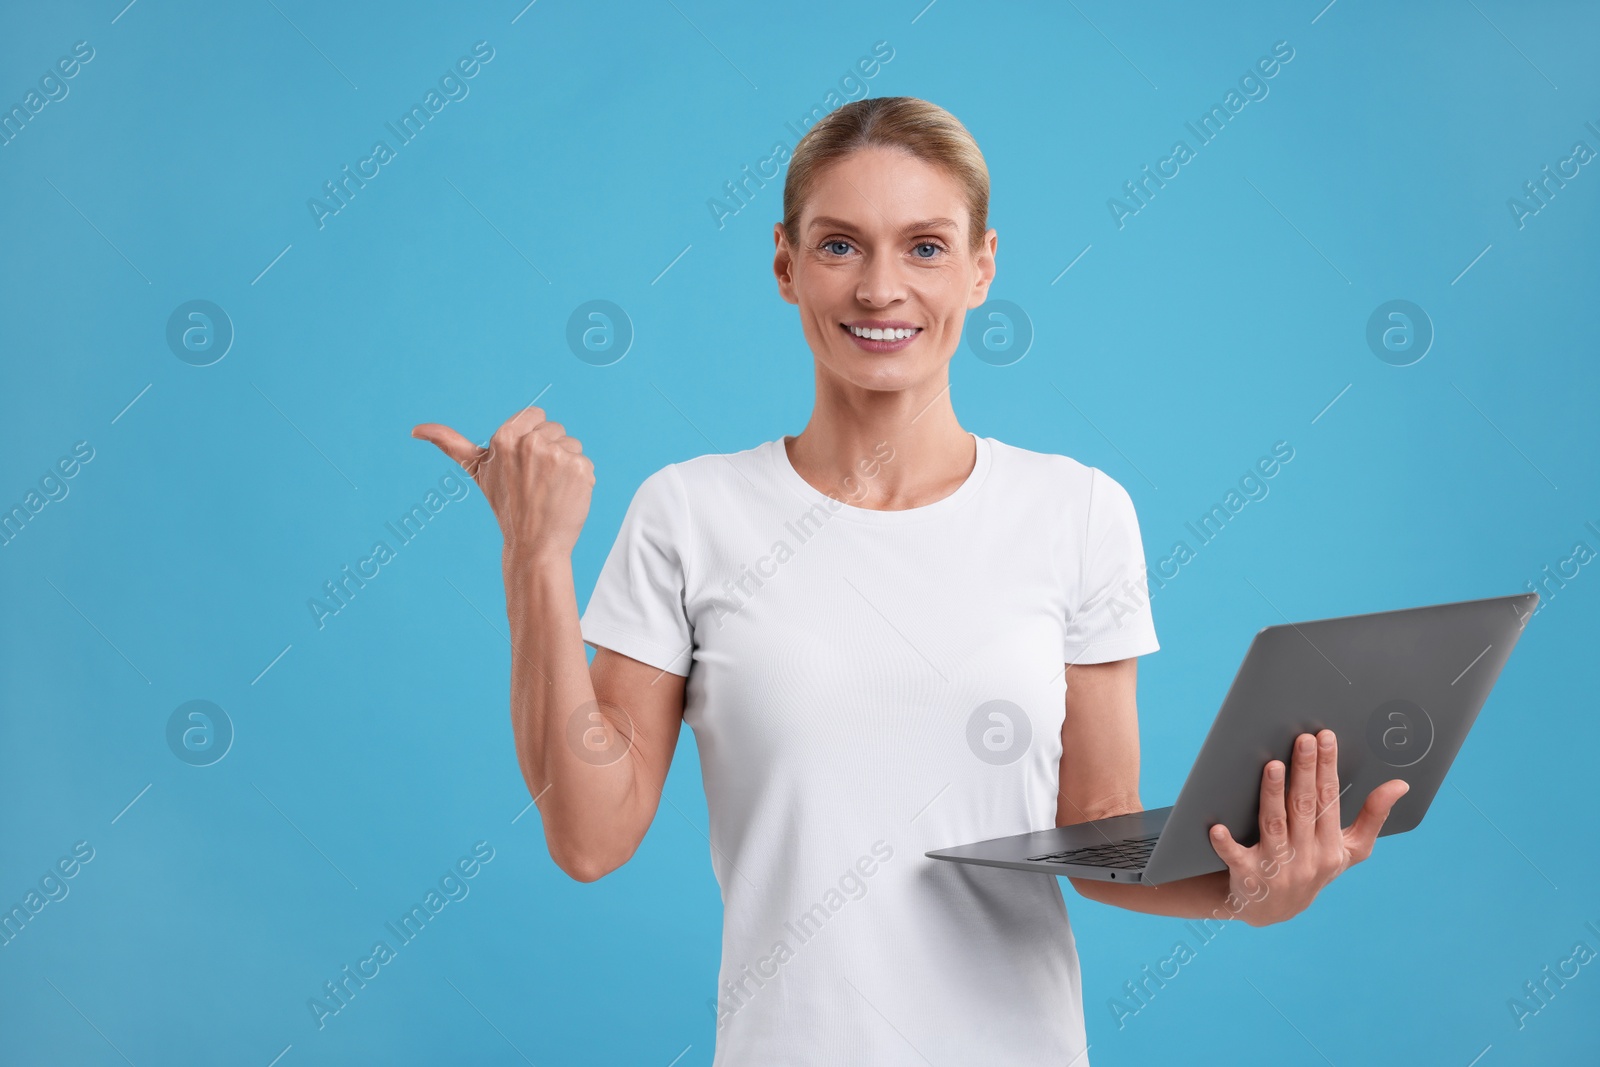 Photo of Special promotion. Smiling woman with laptop pointing at something on light blue background